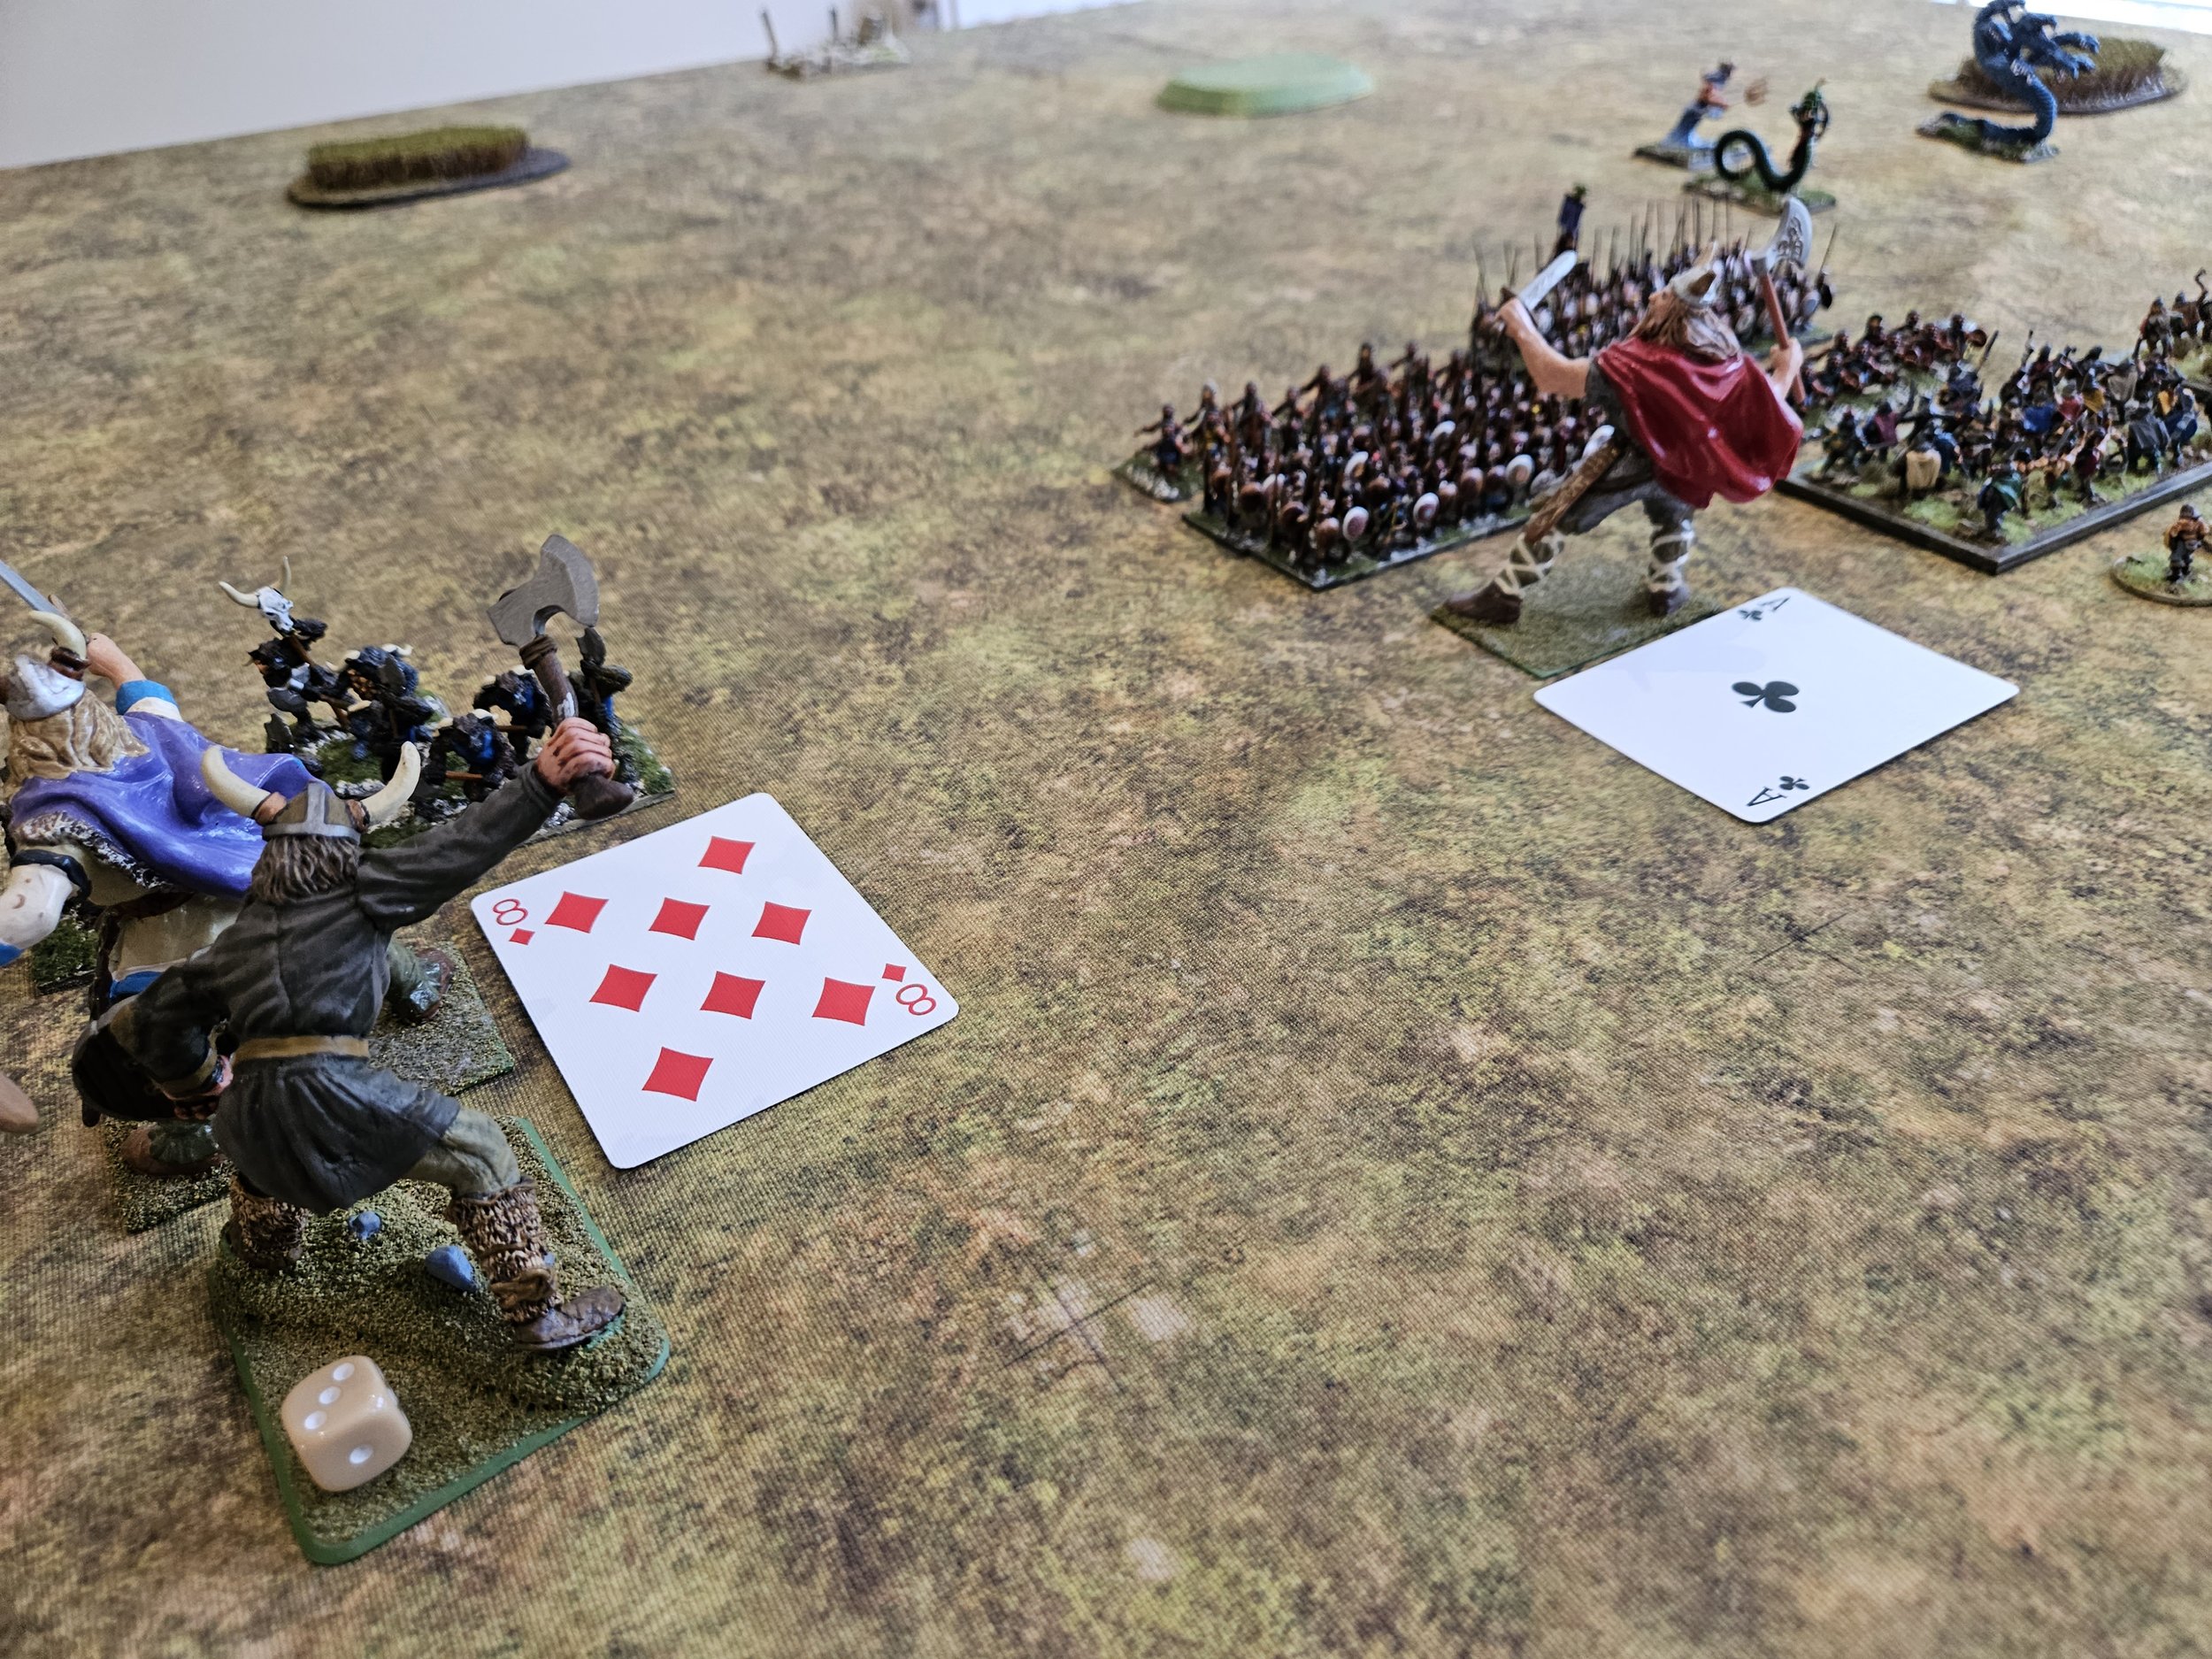  It’s the Norse turn two now, and the Jotun in the red cloak has drawn an ‘Ace’ for activation. Not a problem: the Jotun Officer/Shaman send s a magic point his way… 